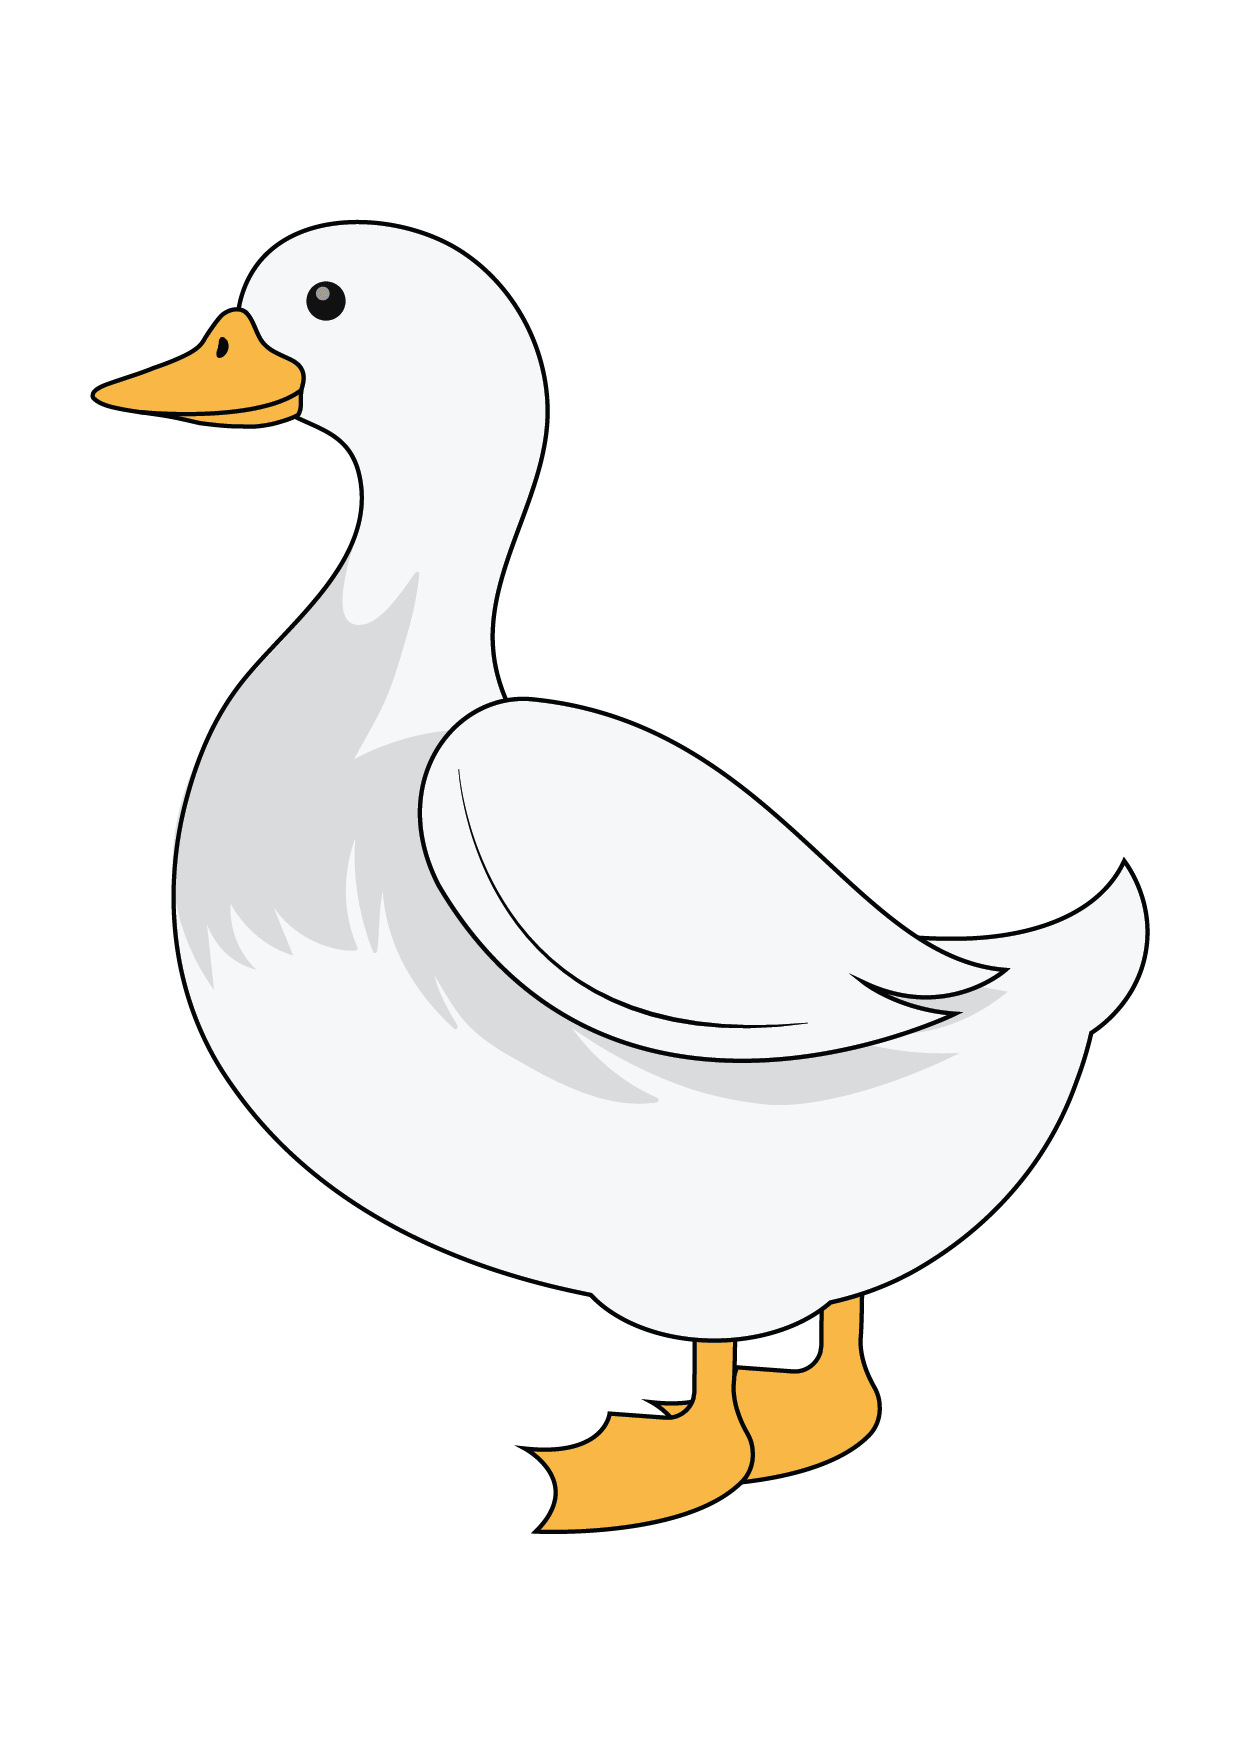 How to Draw A Duck Step by Step Printable